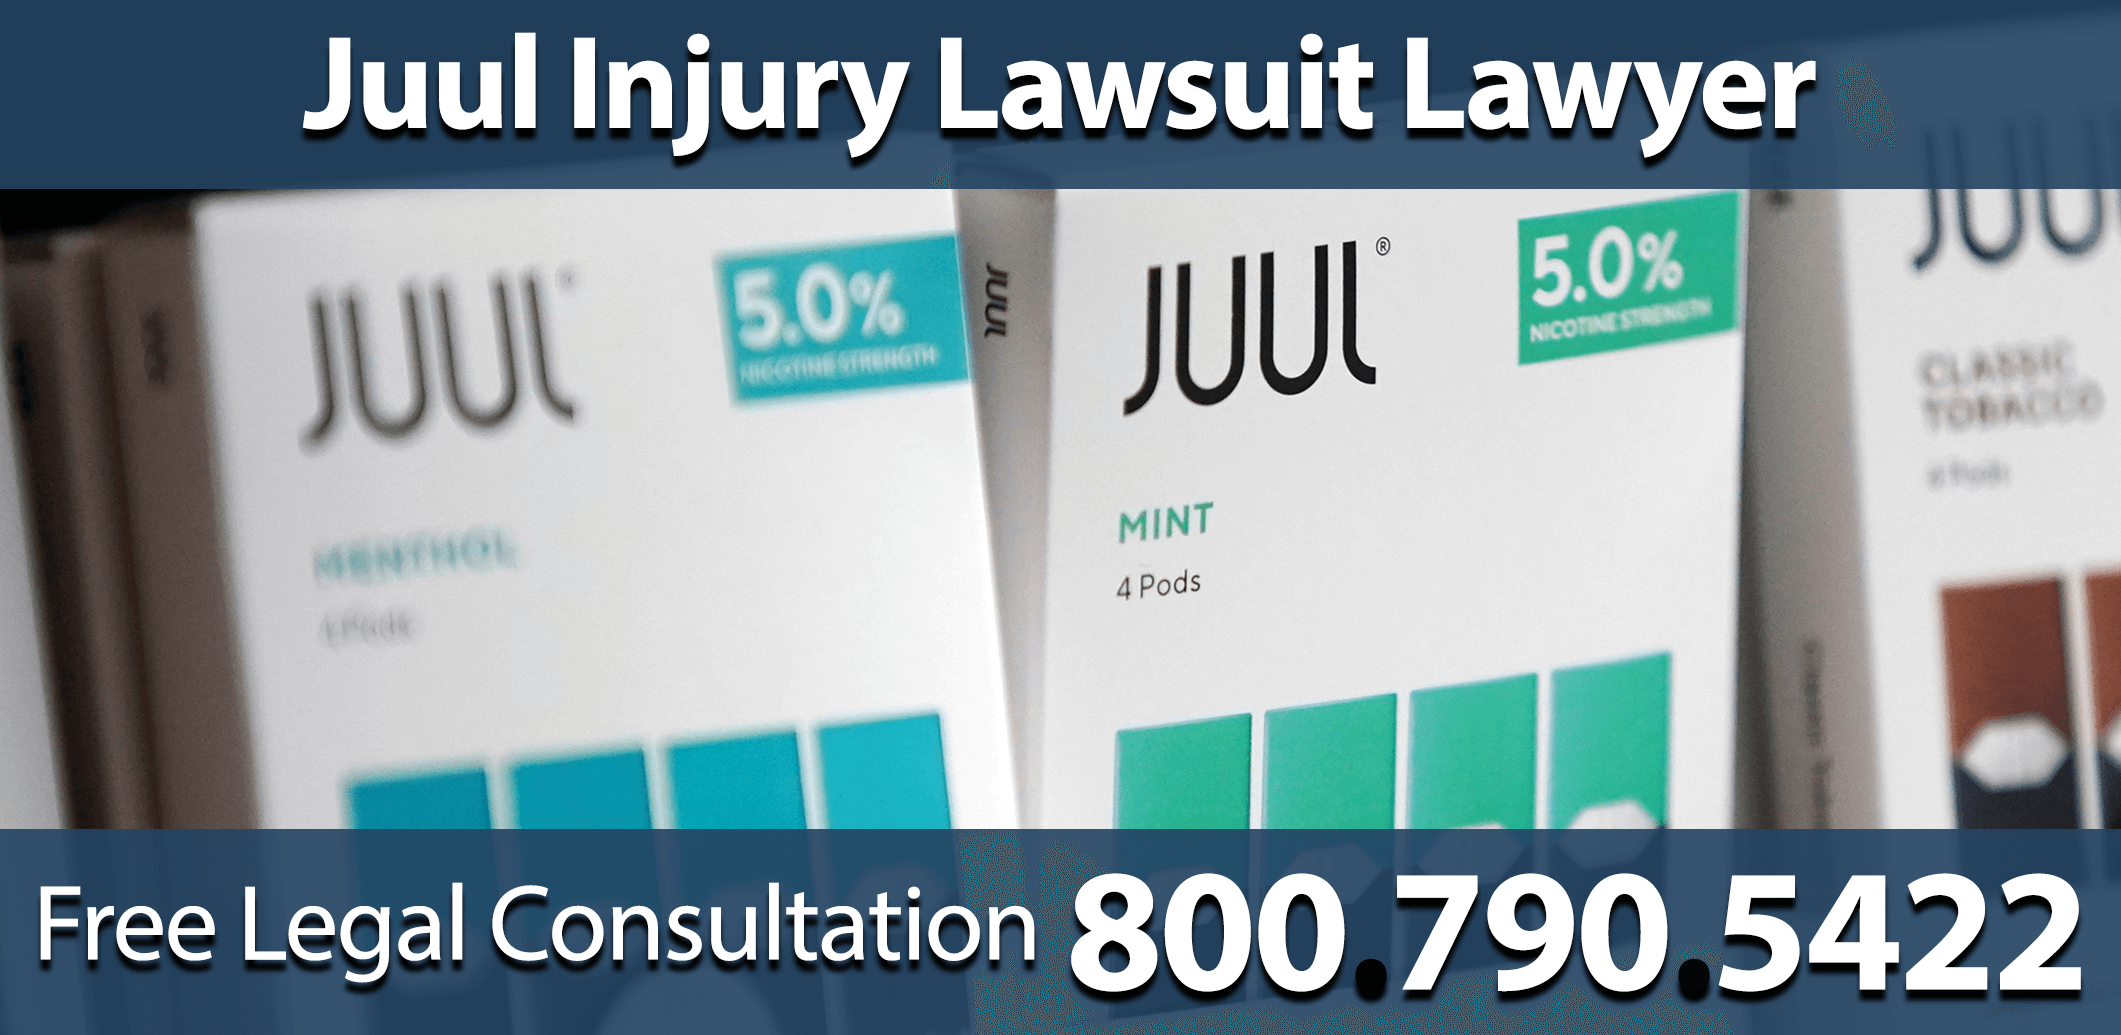 juul injury lawsuit lawyer dangerous respiratory lungs asthma seizure high blood stroke sue attorney compensation medical expenses